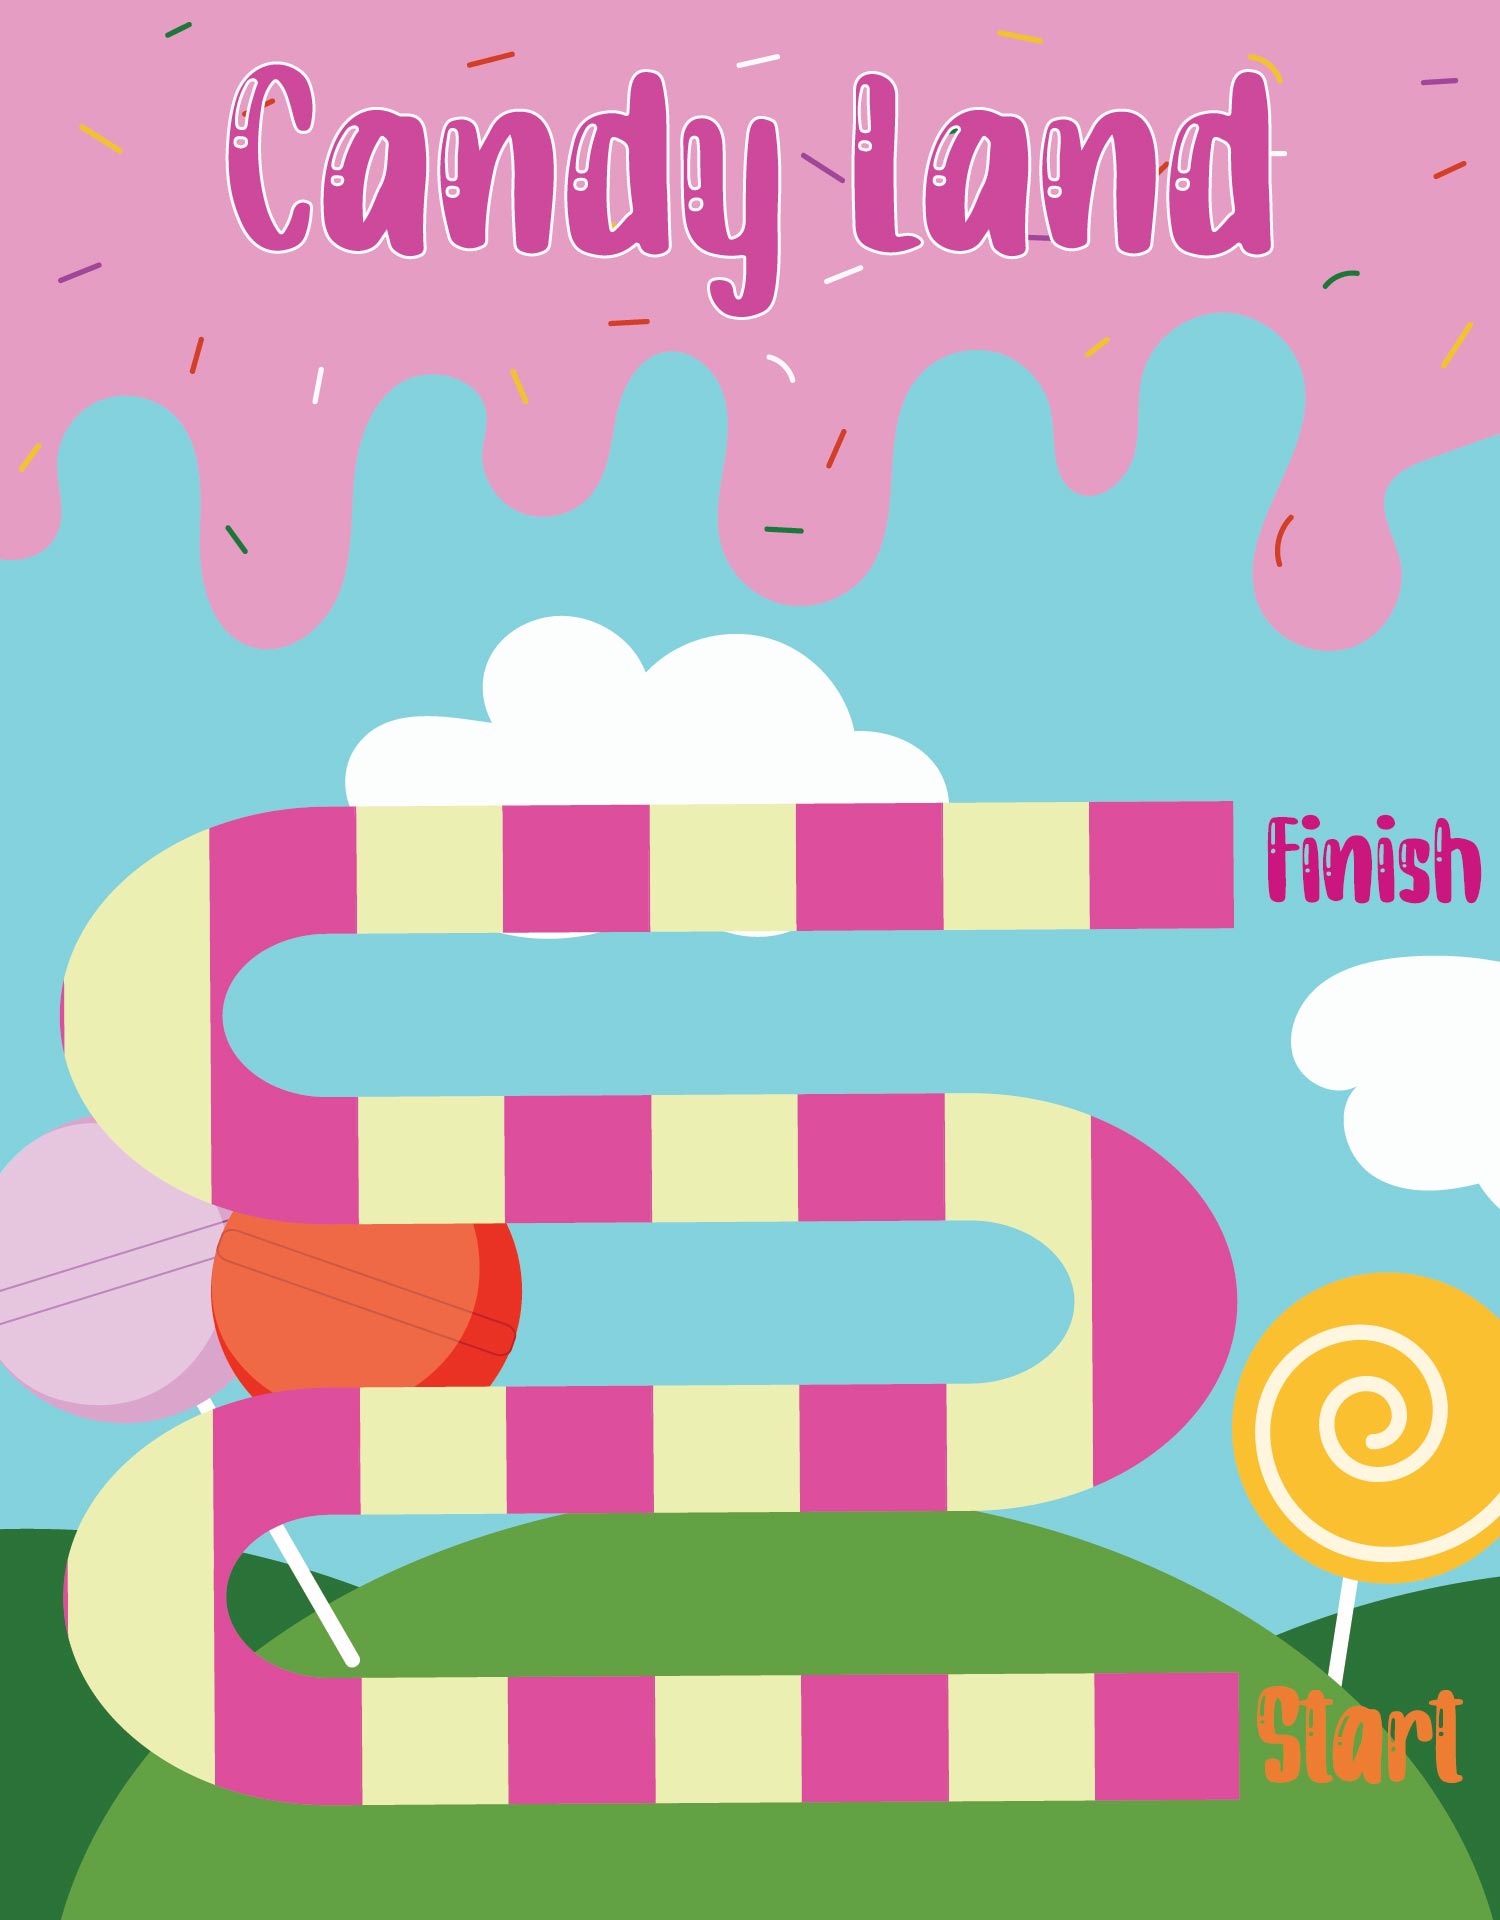 Candyland Game Board Template